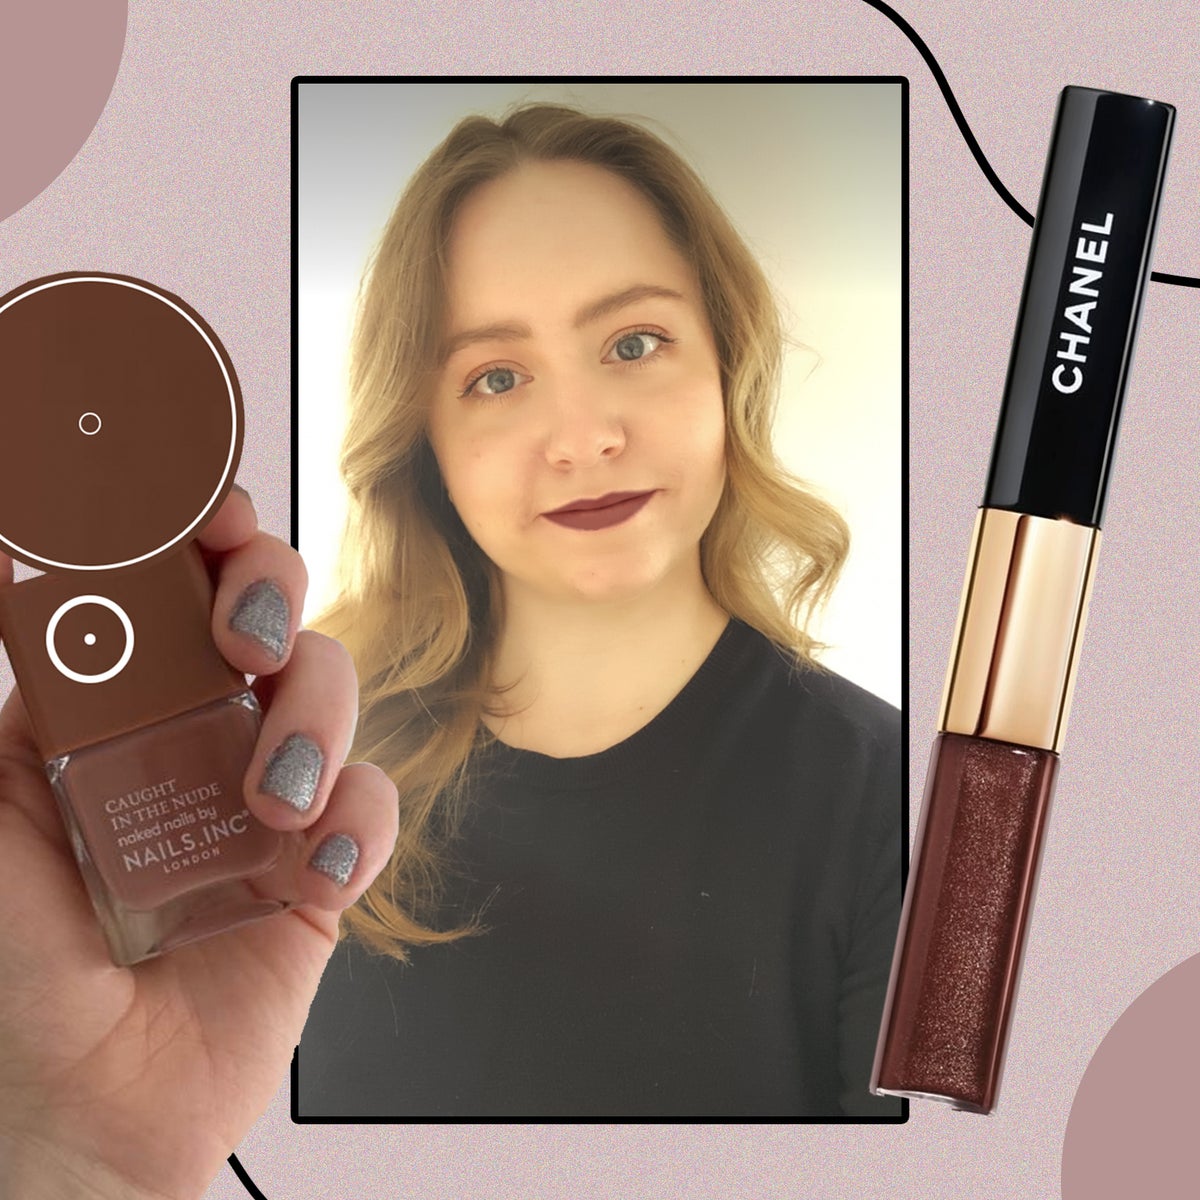 Chanel's new Lipscanner app review: Virtual lipstick tester